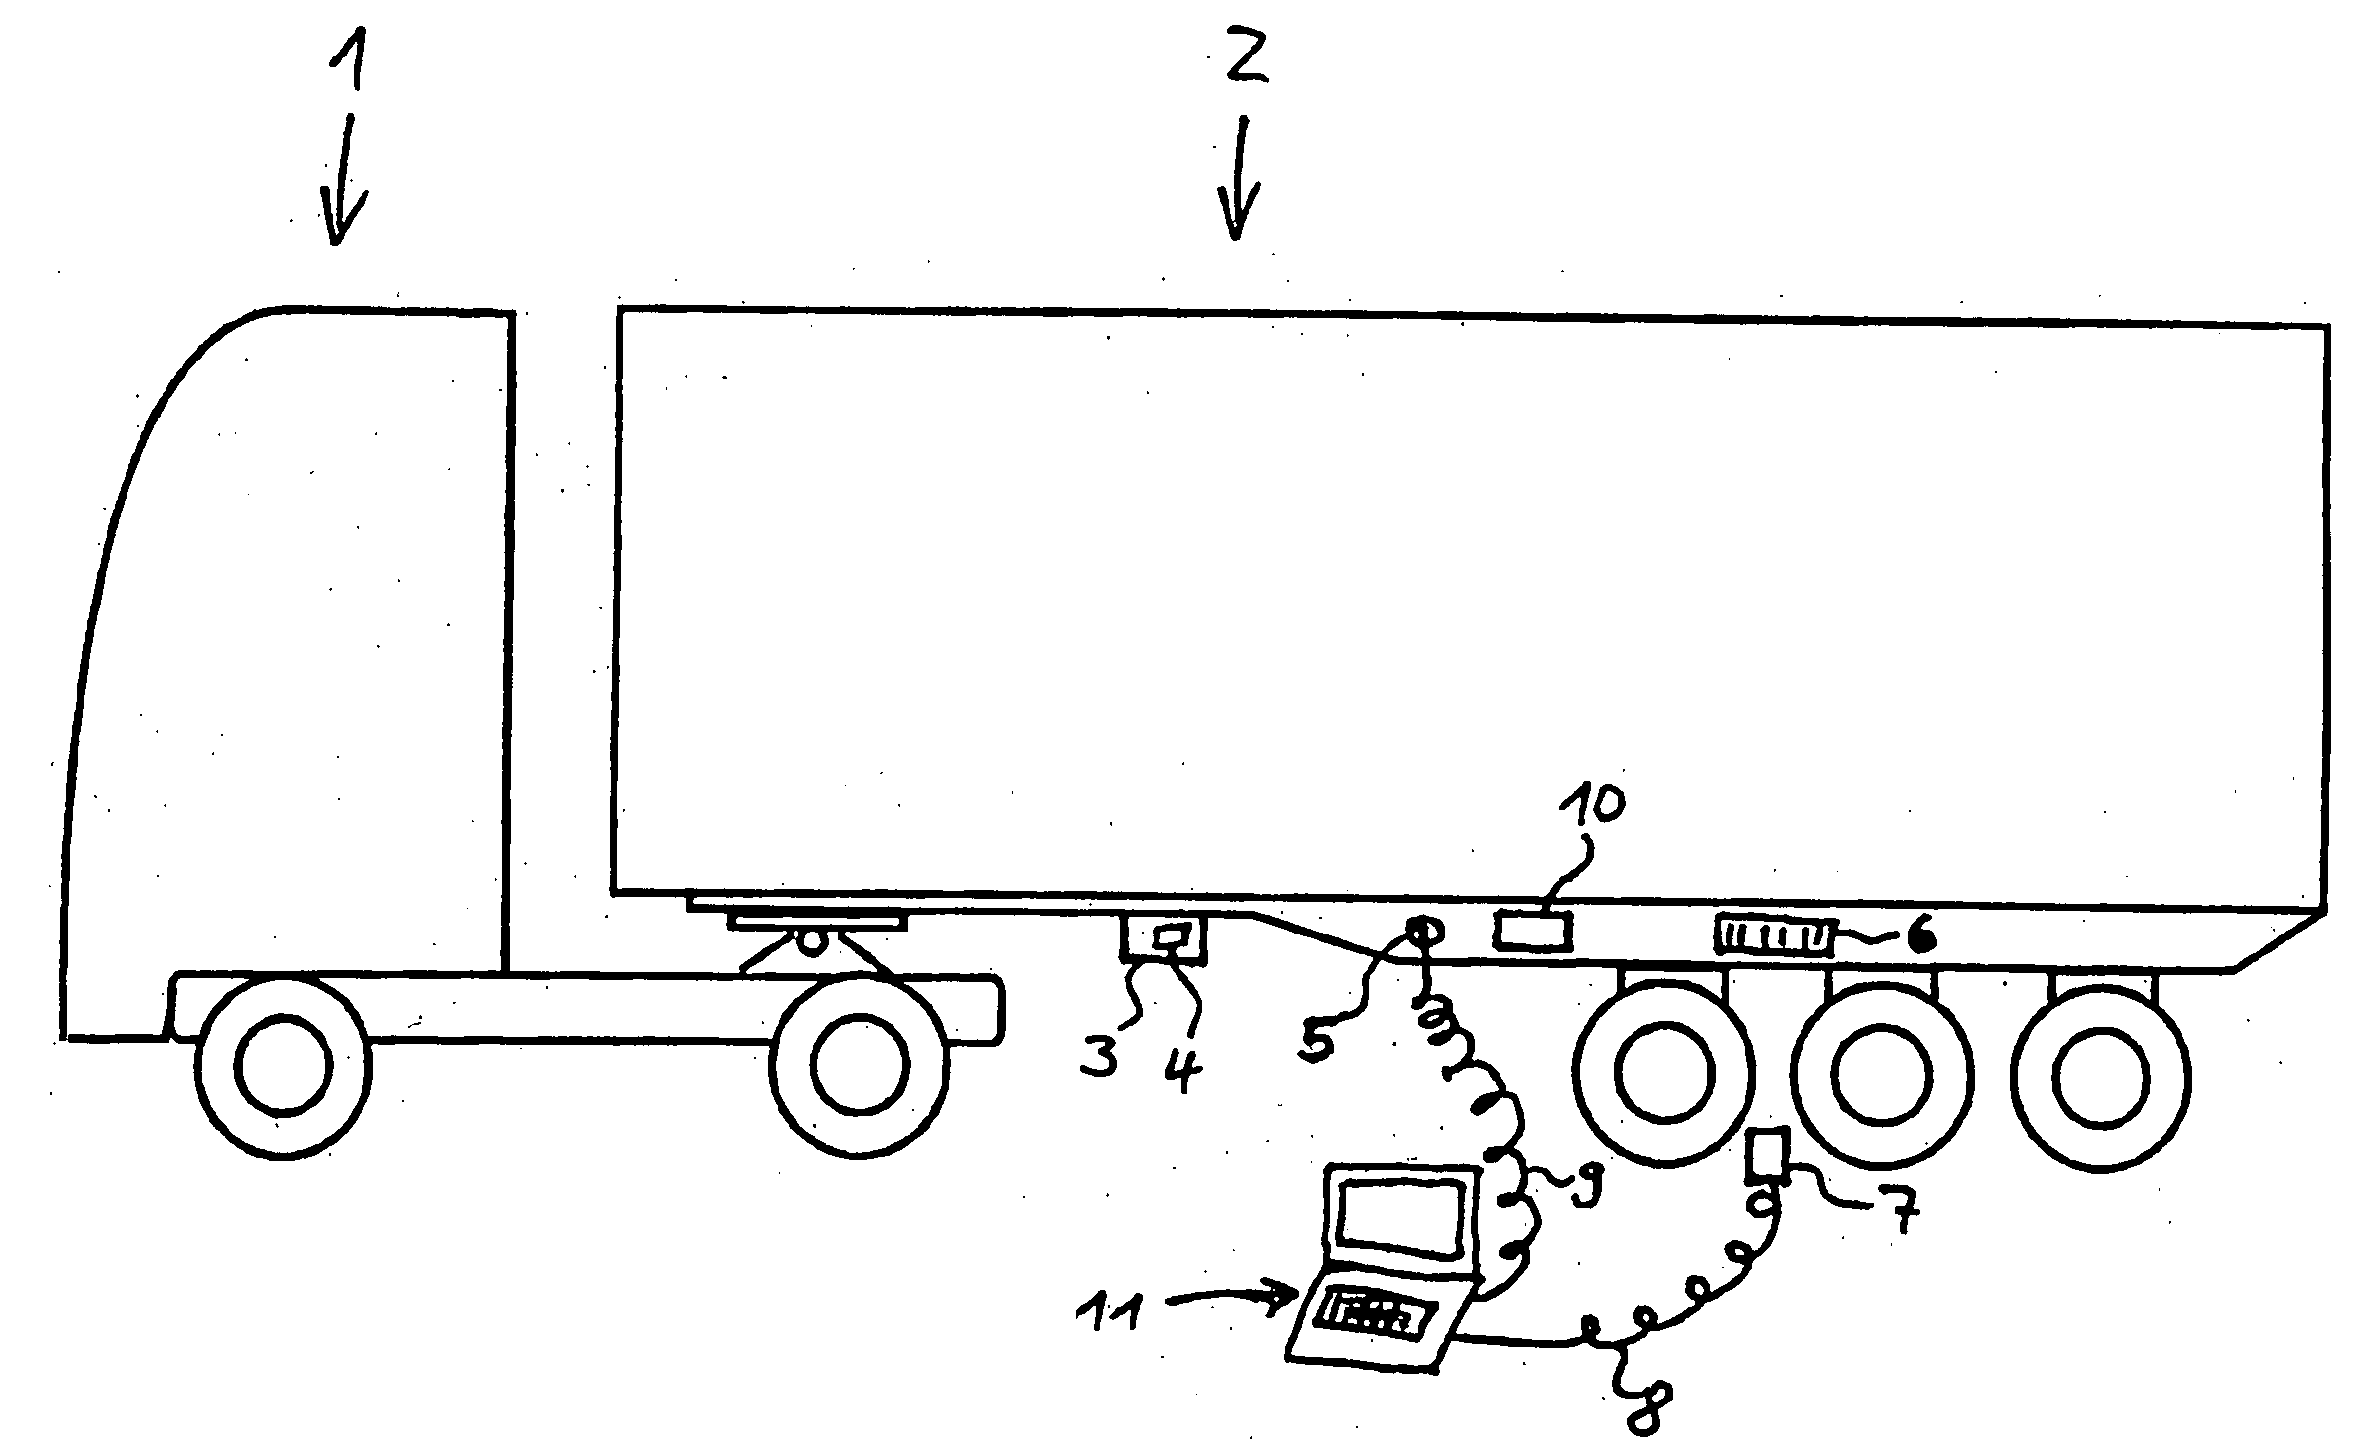 Commercial vehicle trailer with an electronically controlled braking system